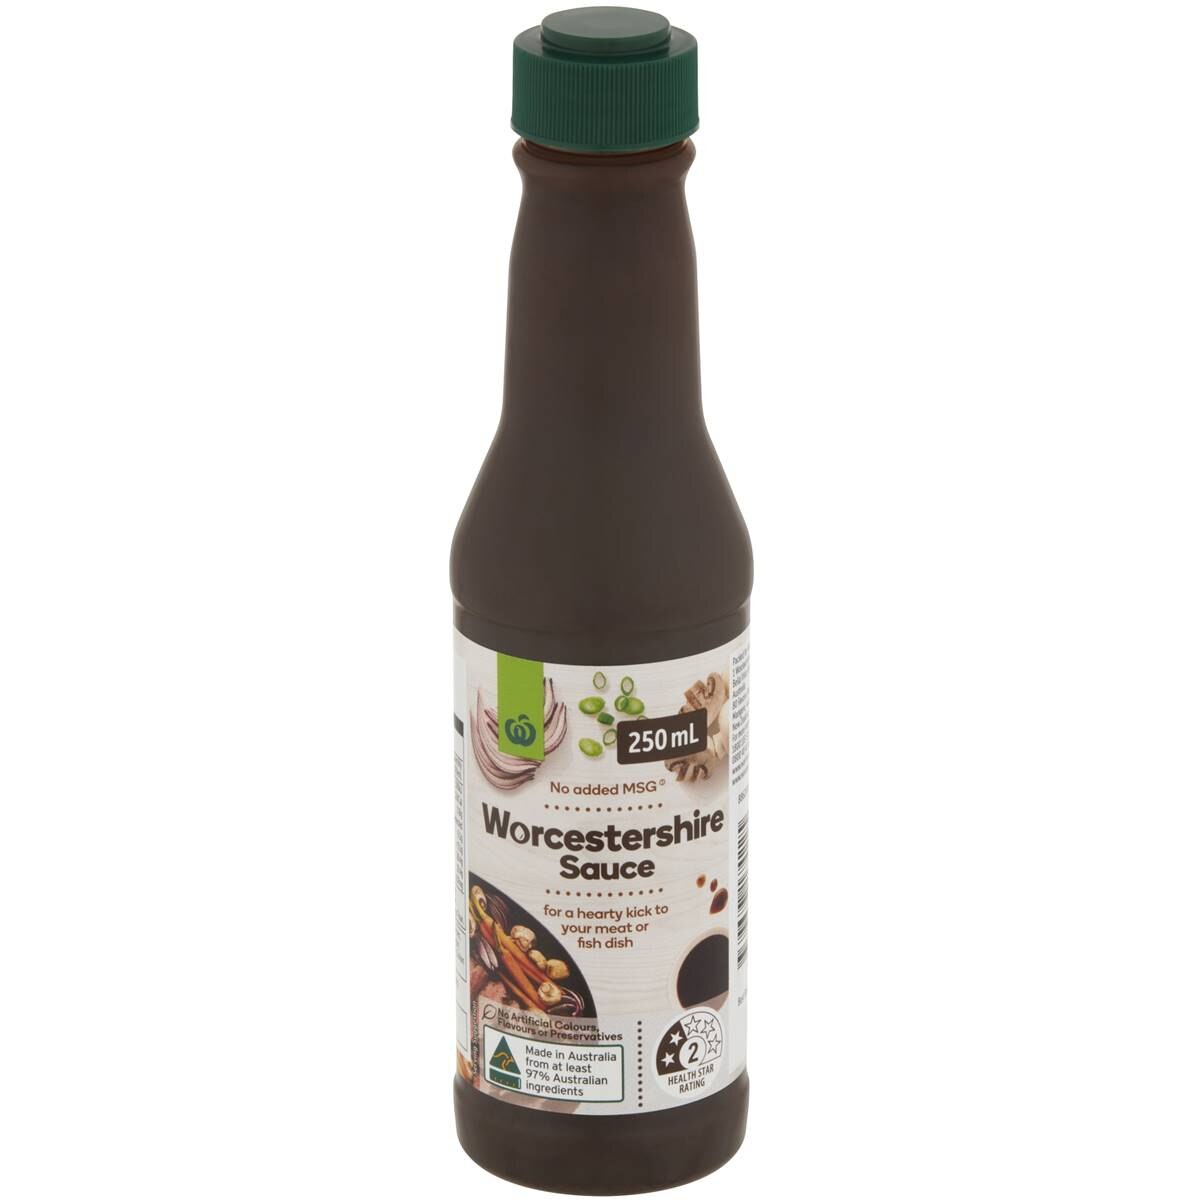 Calories in Woolworths Worcestershire Sauce